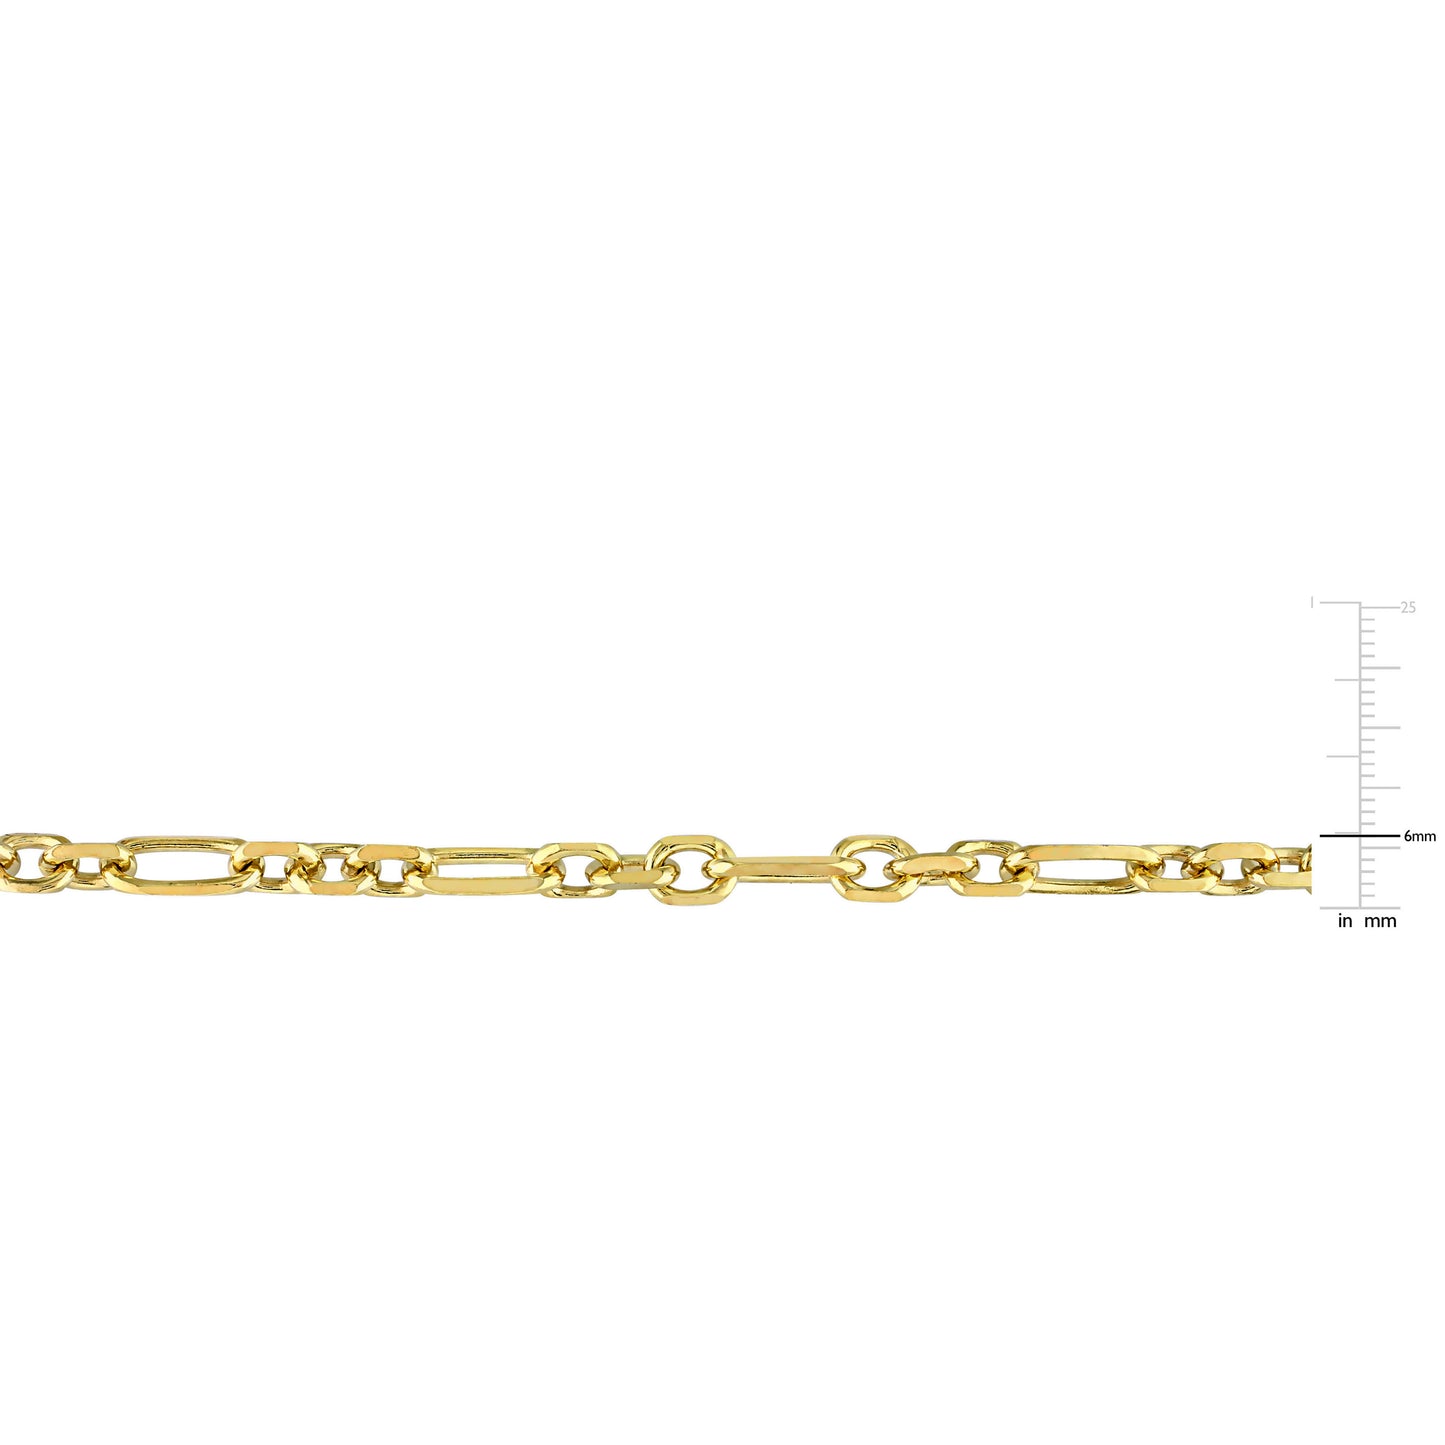 18k Yellow Gold Plated Figaro Chain Bracelet in 6mm